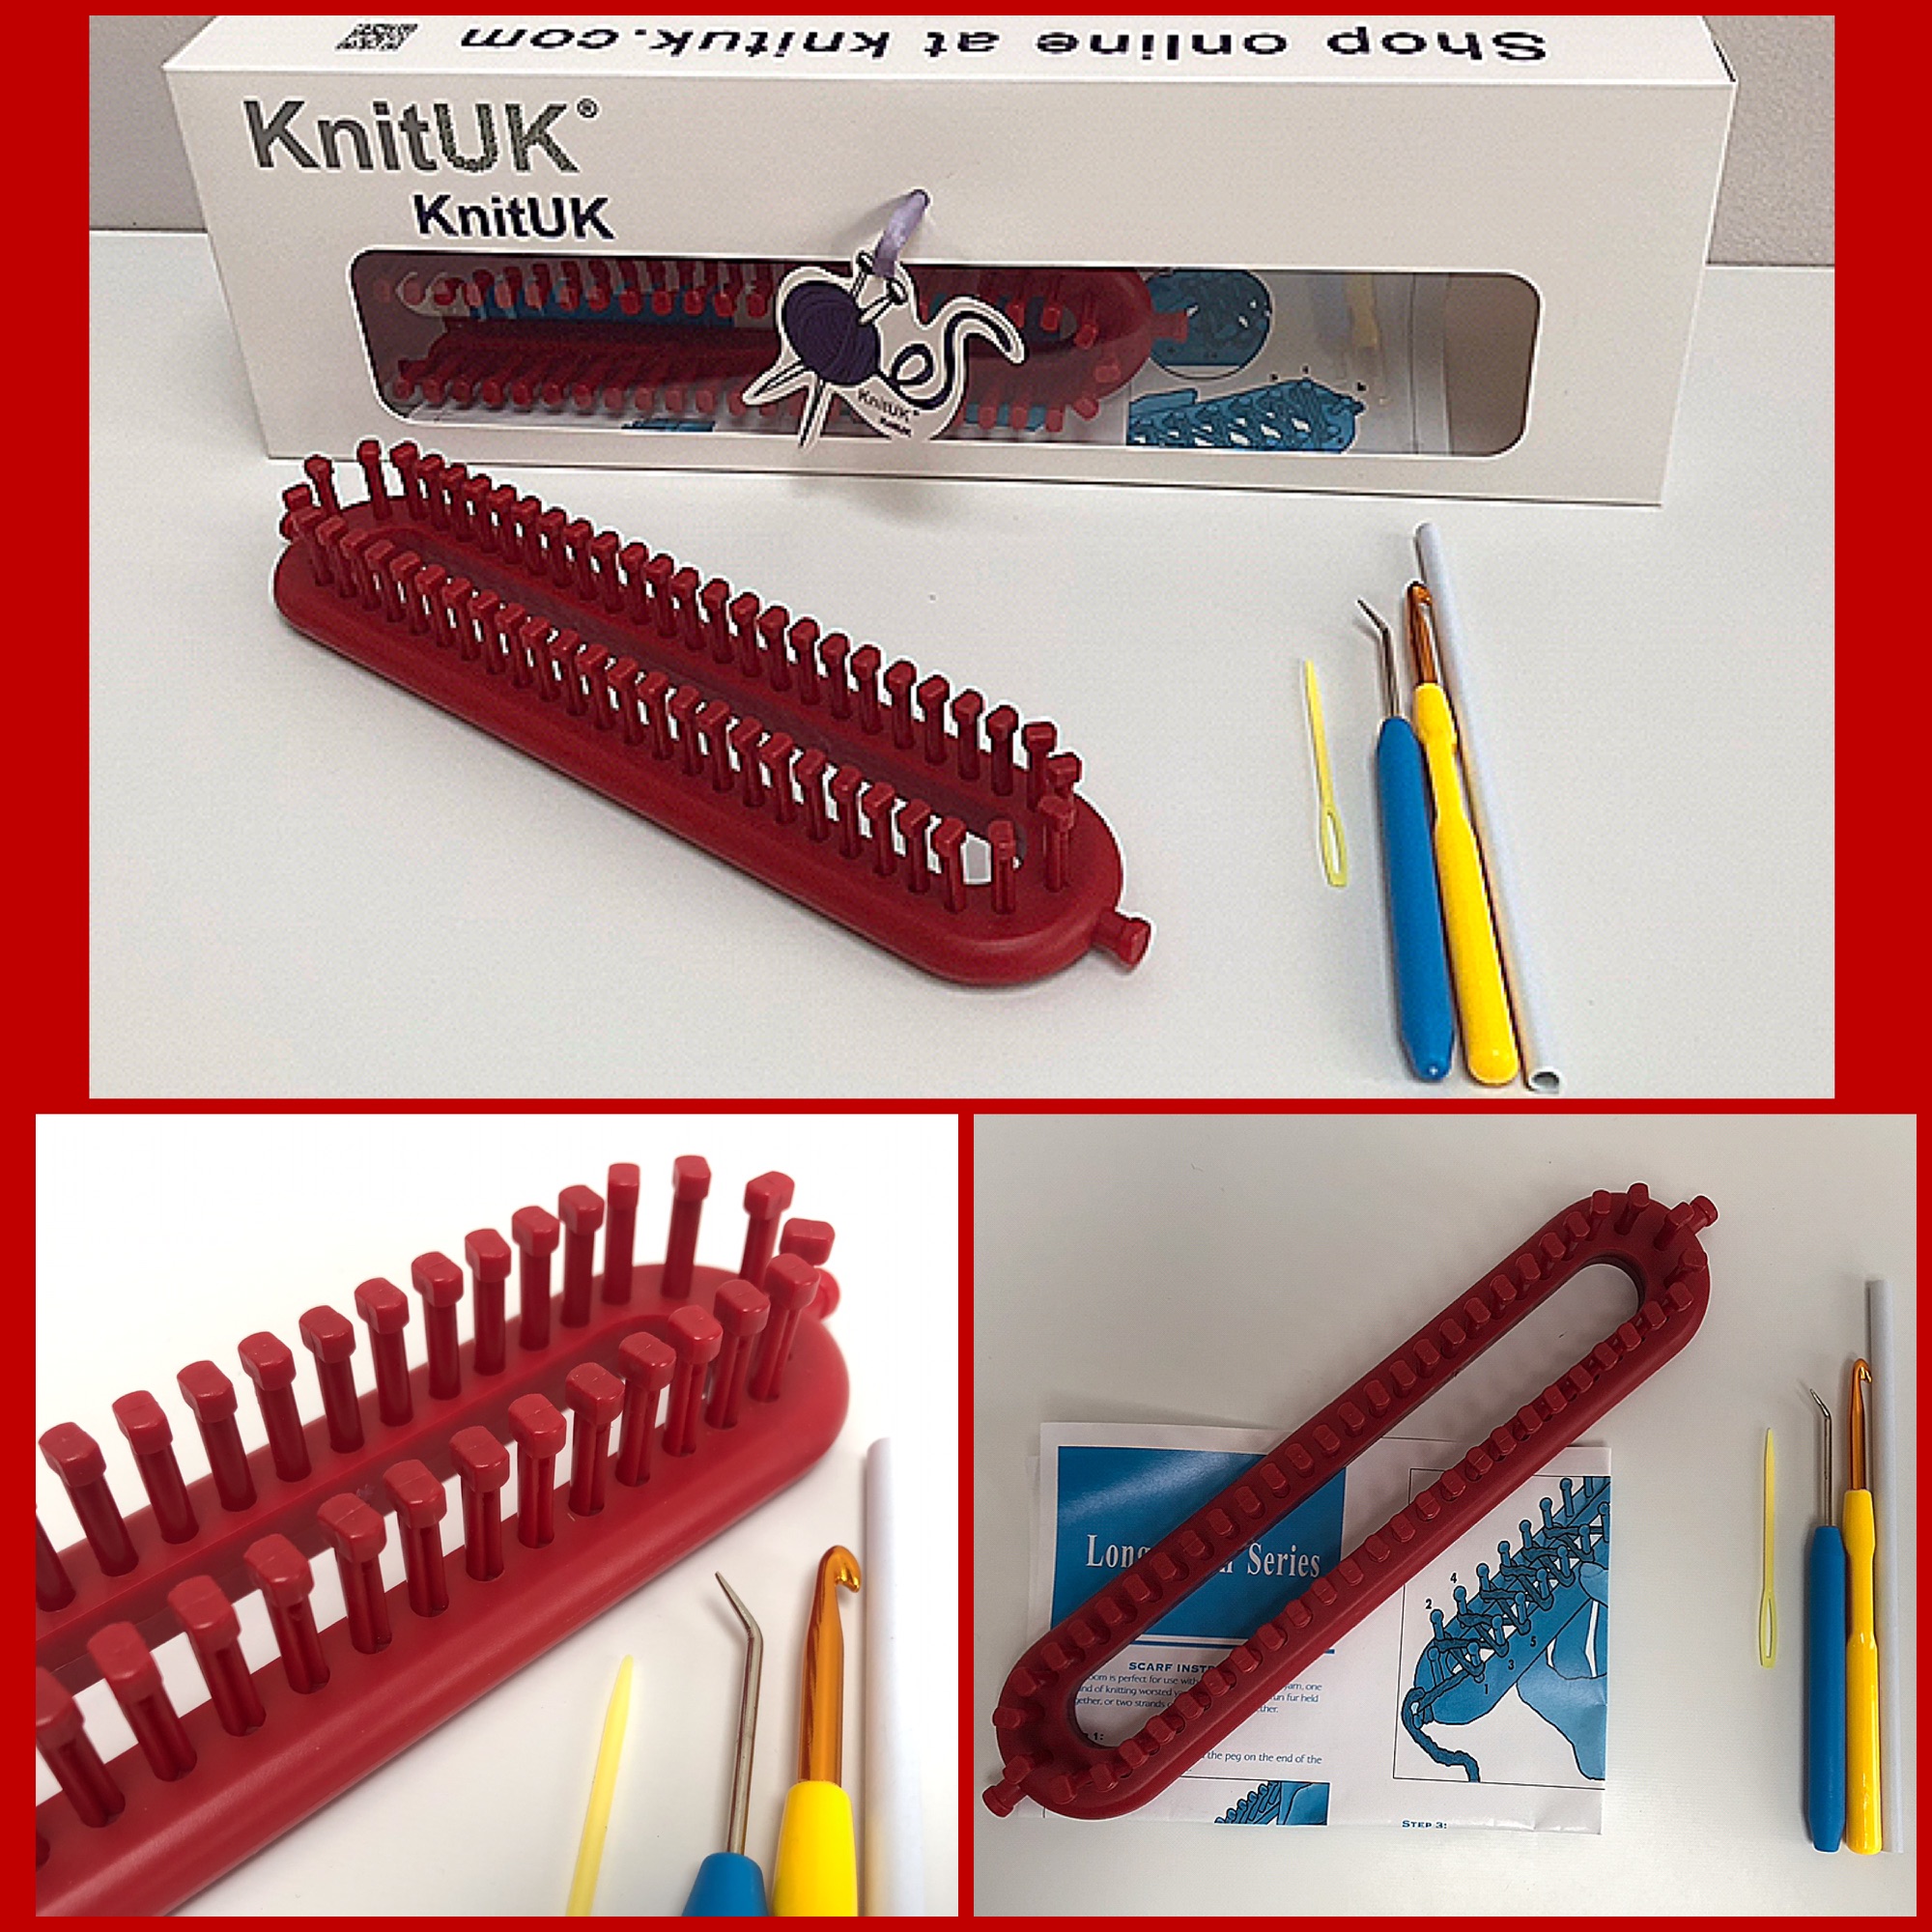 KnitUK long red knitting loom complete